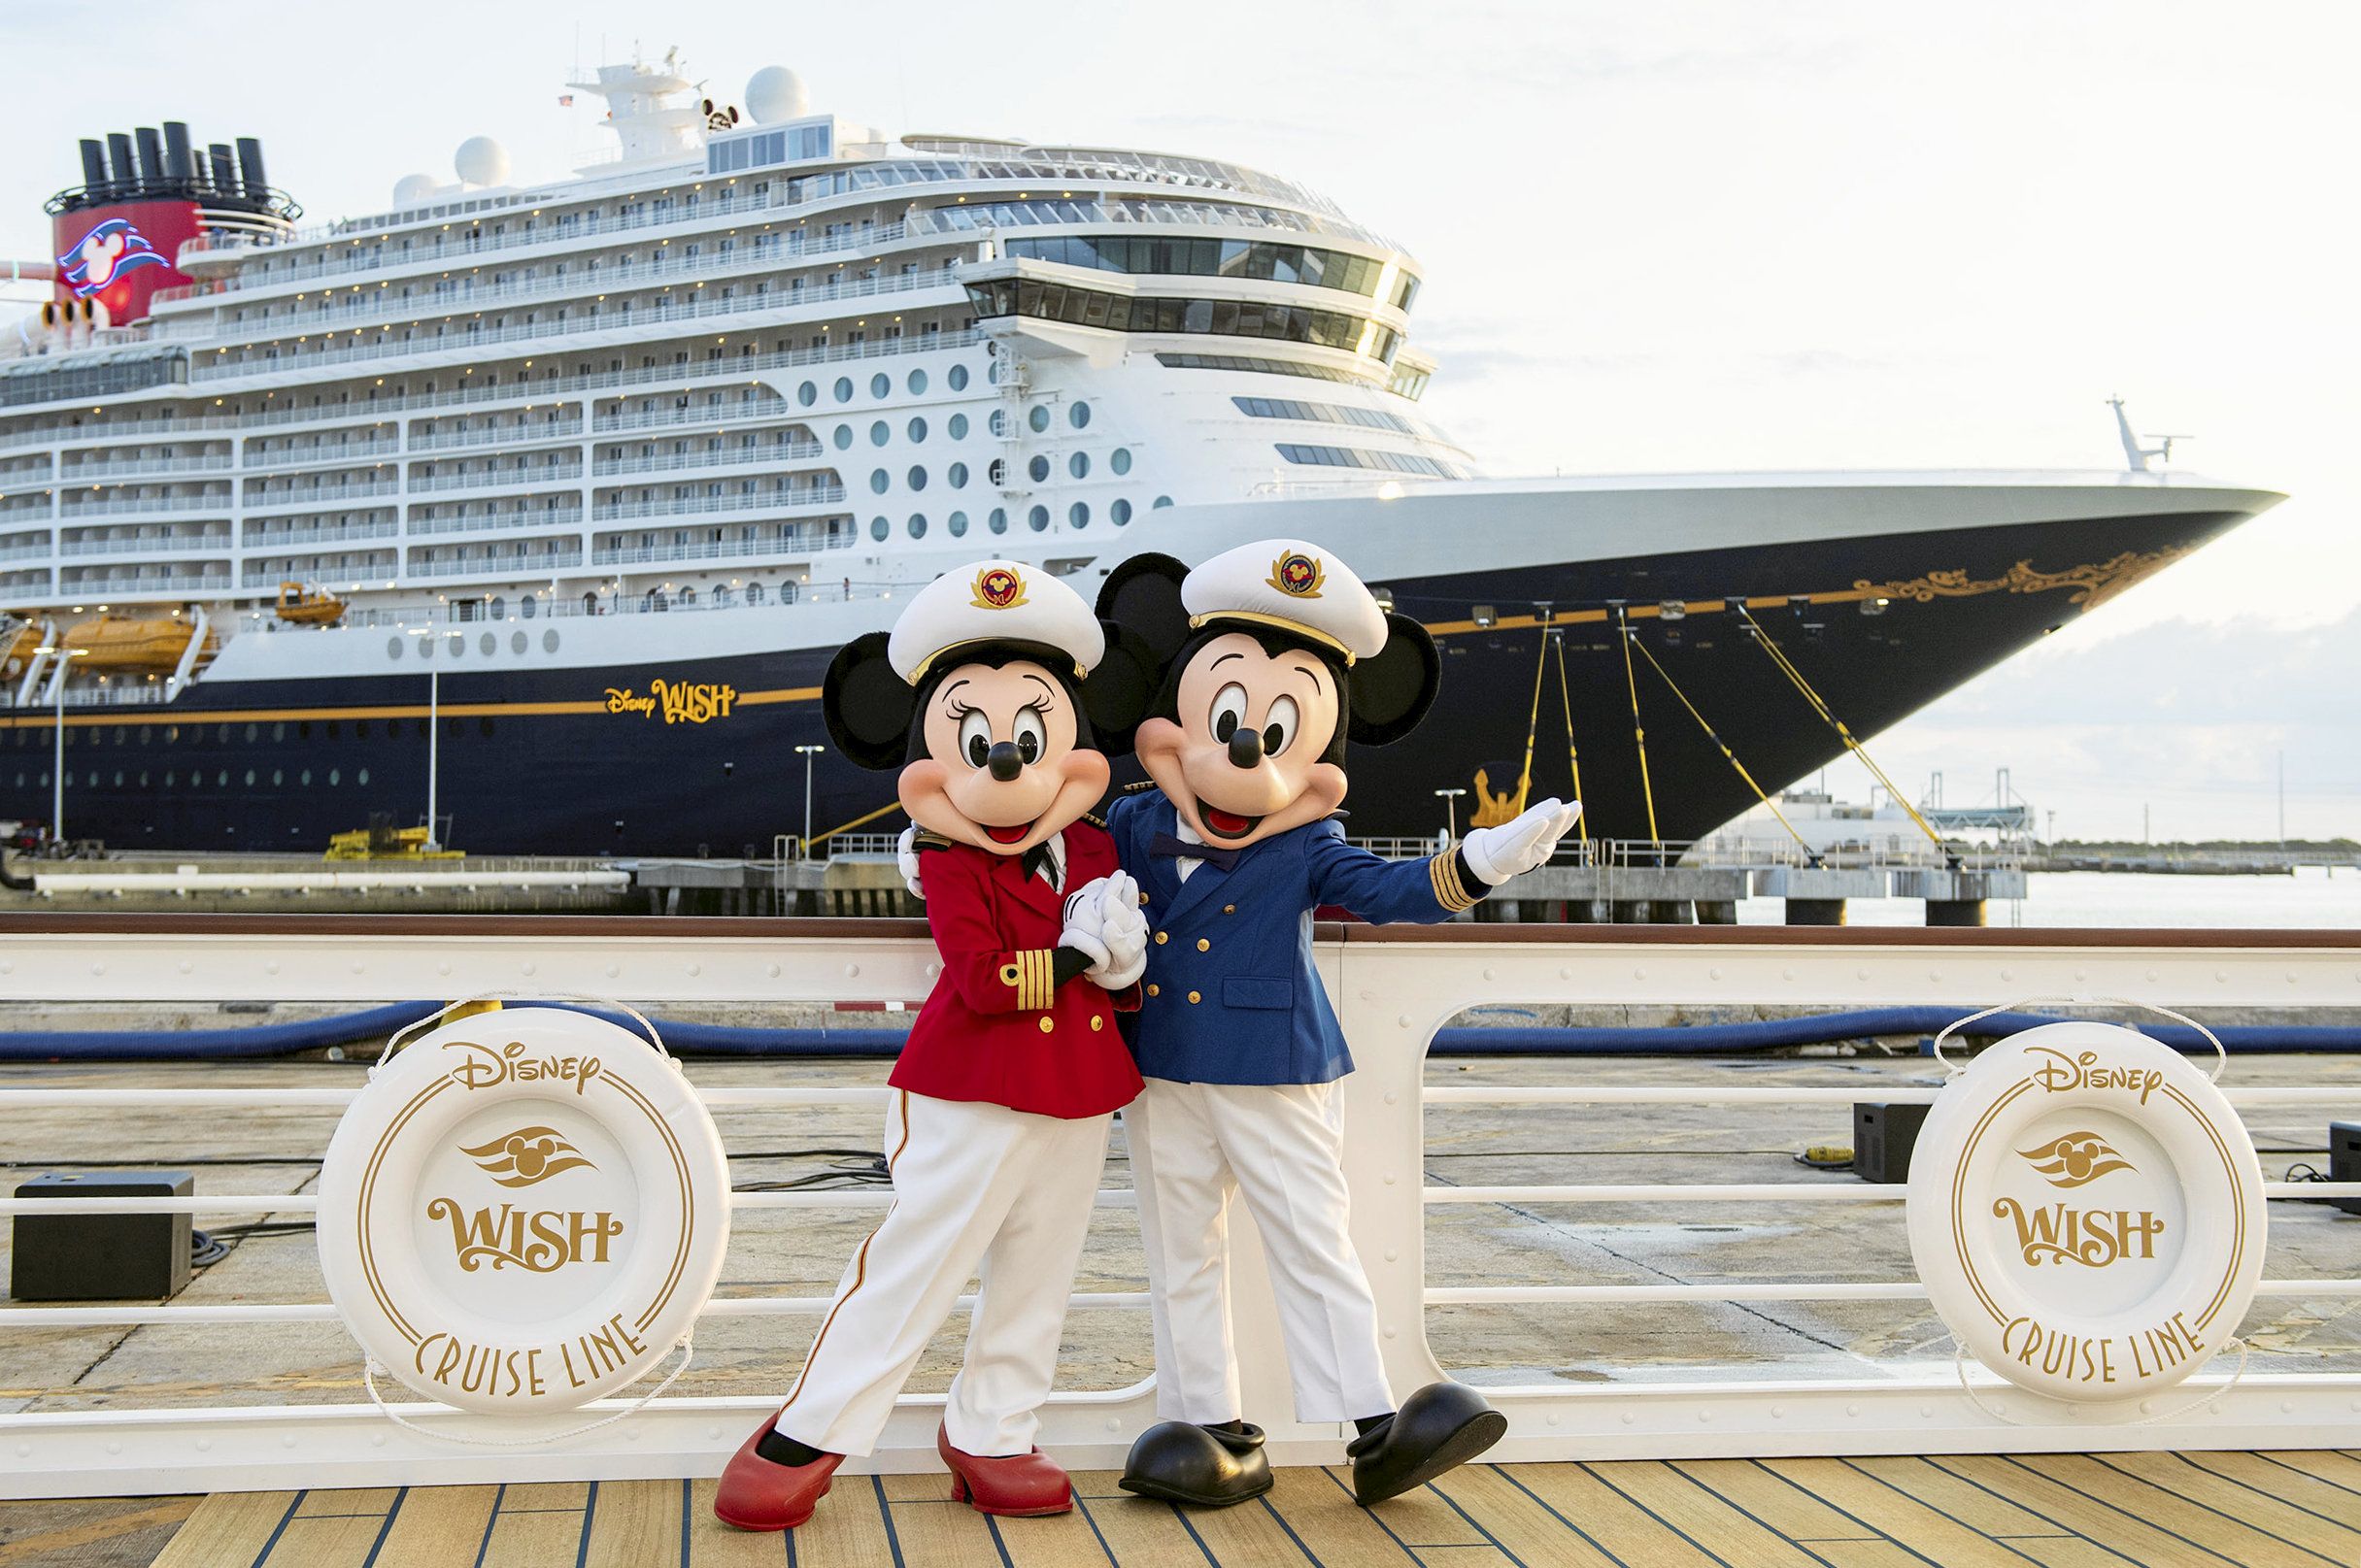 Disney’s newest cruise liner has something for everyone